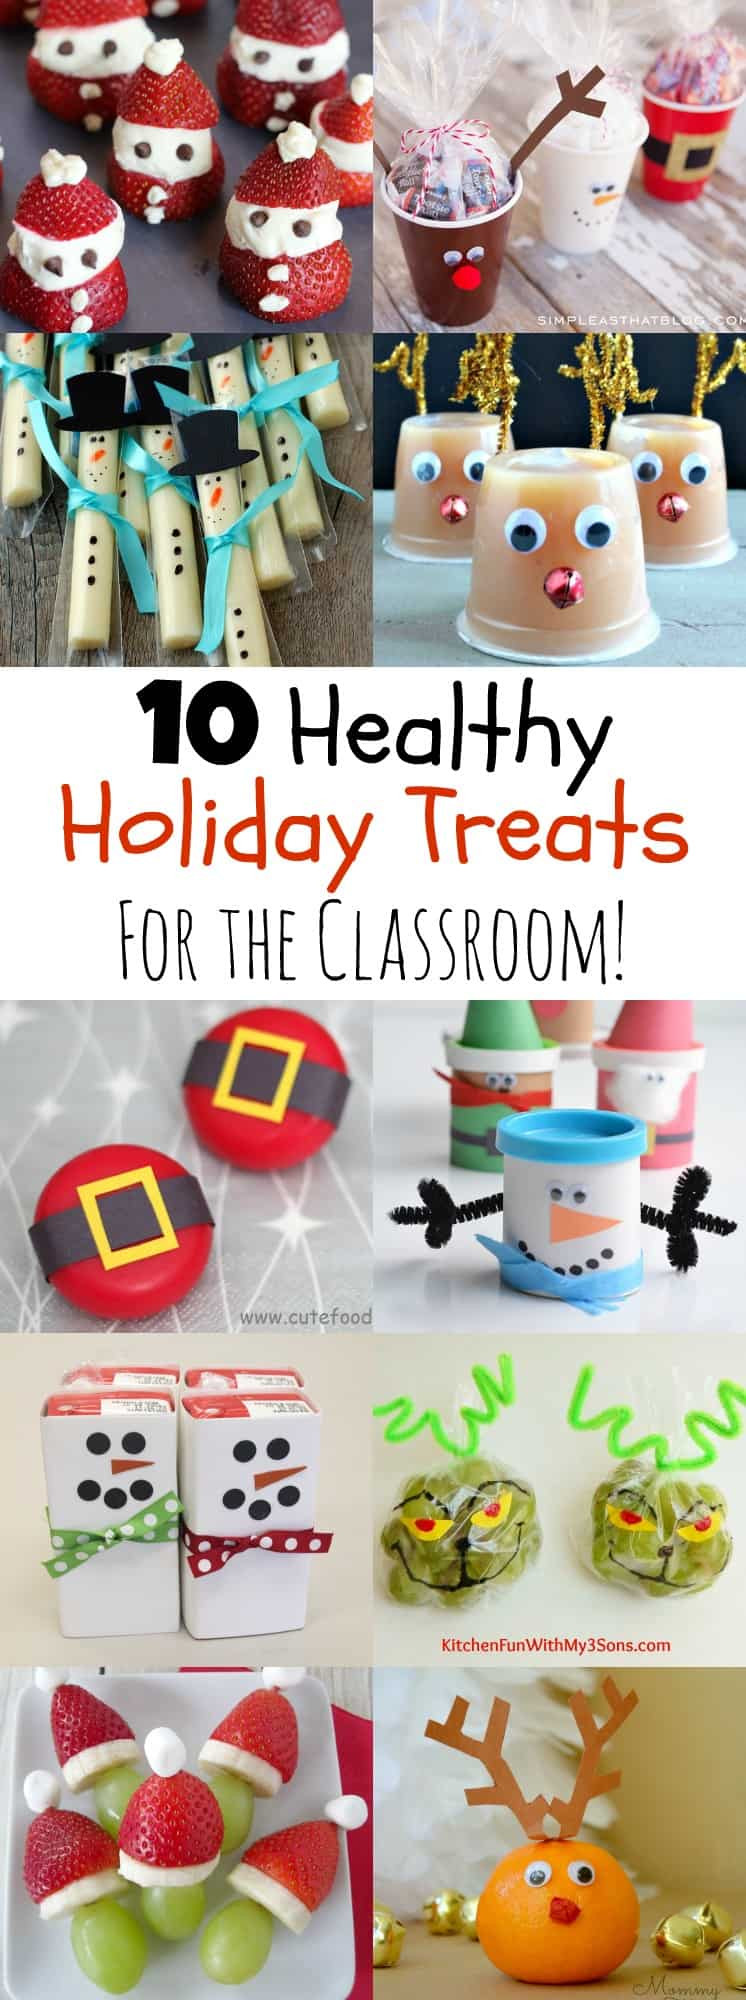 Classroom Holiday Party Ideas
 10 Healthy Holiday Treats for the Classroom MOMables